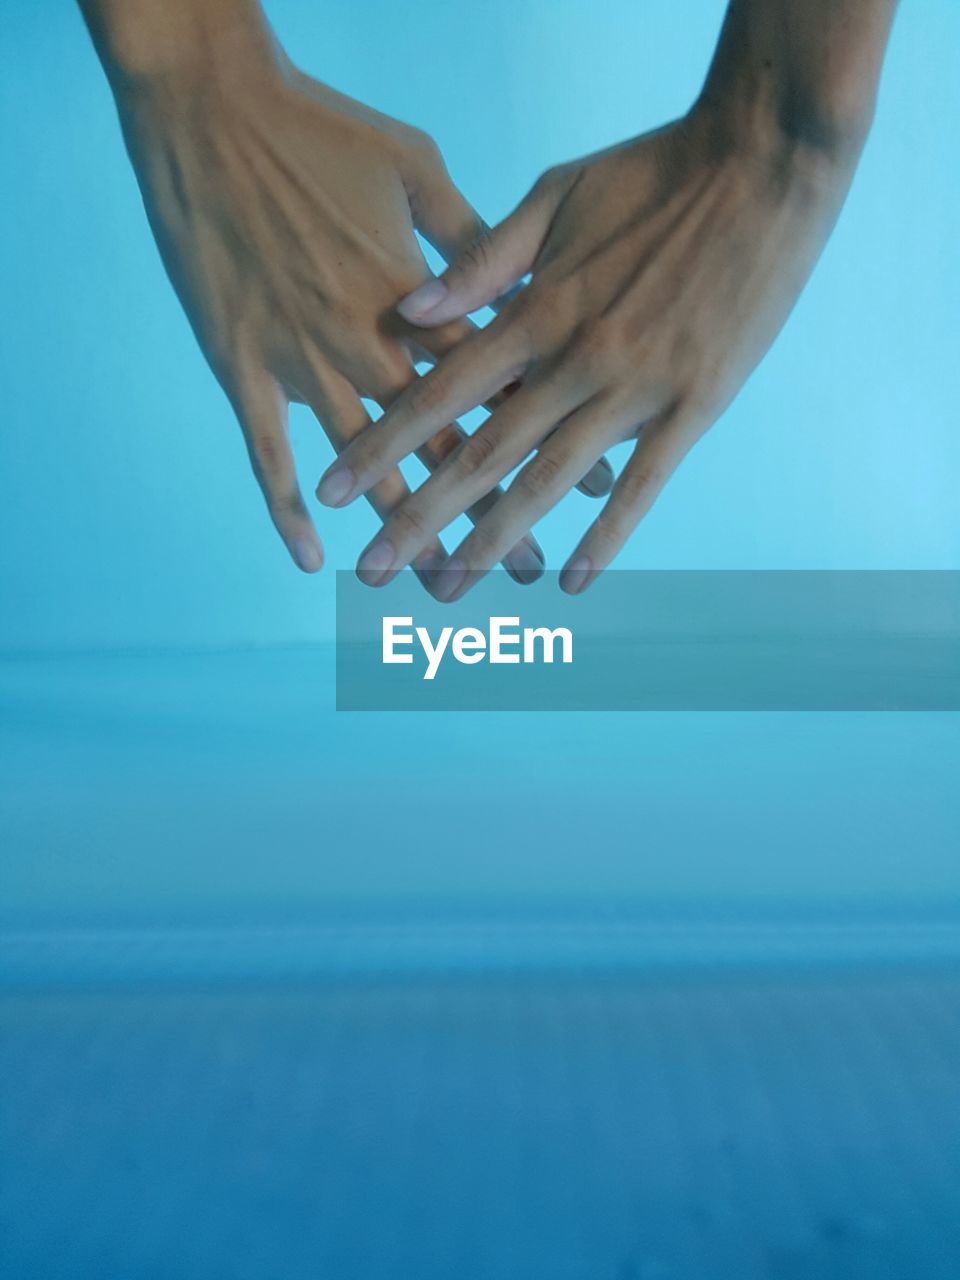 Cropped image of hands in swimming pool